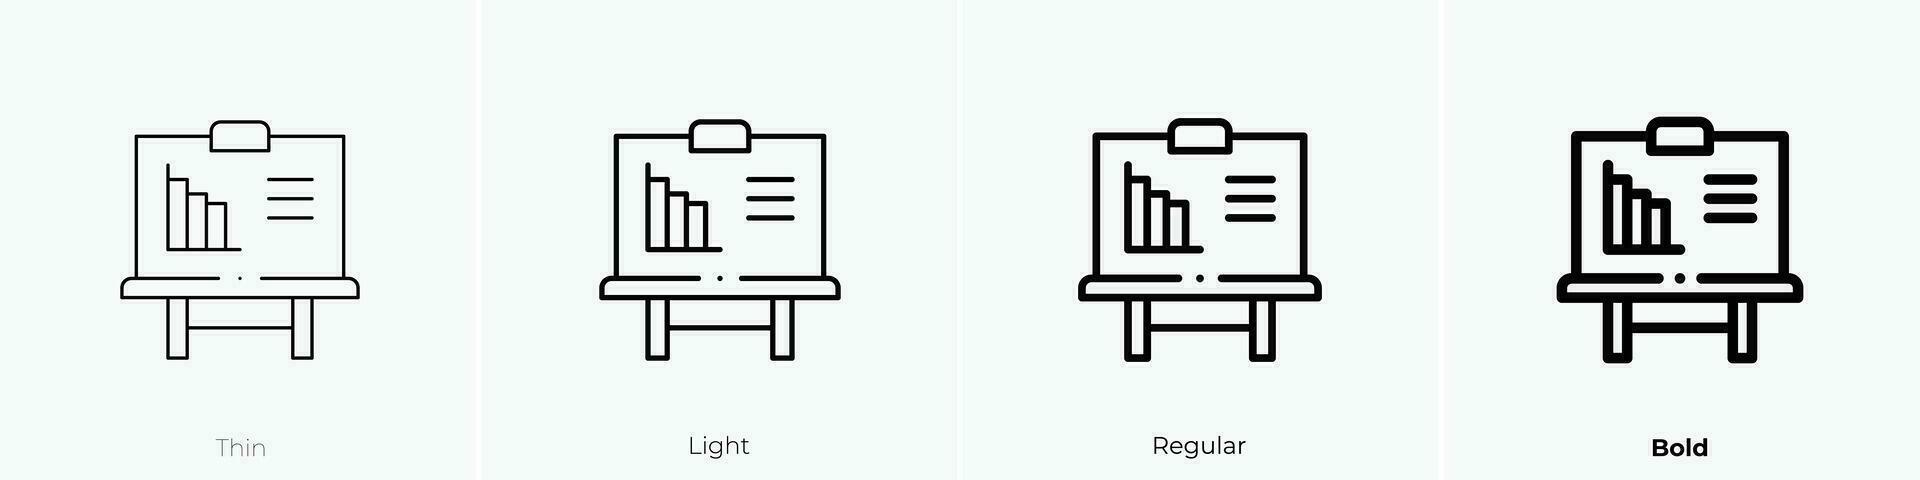 presentation icon. Thin, Light, Regular And Bold style design isolated on white background vector